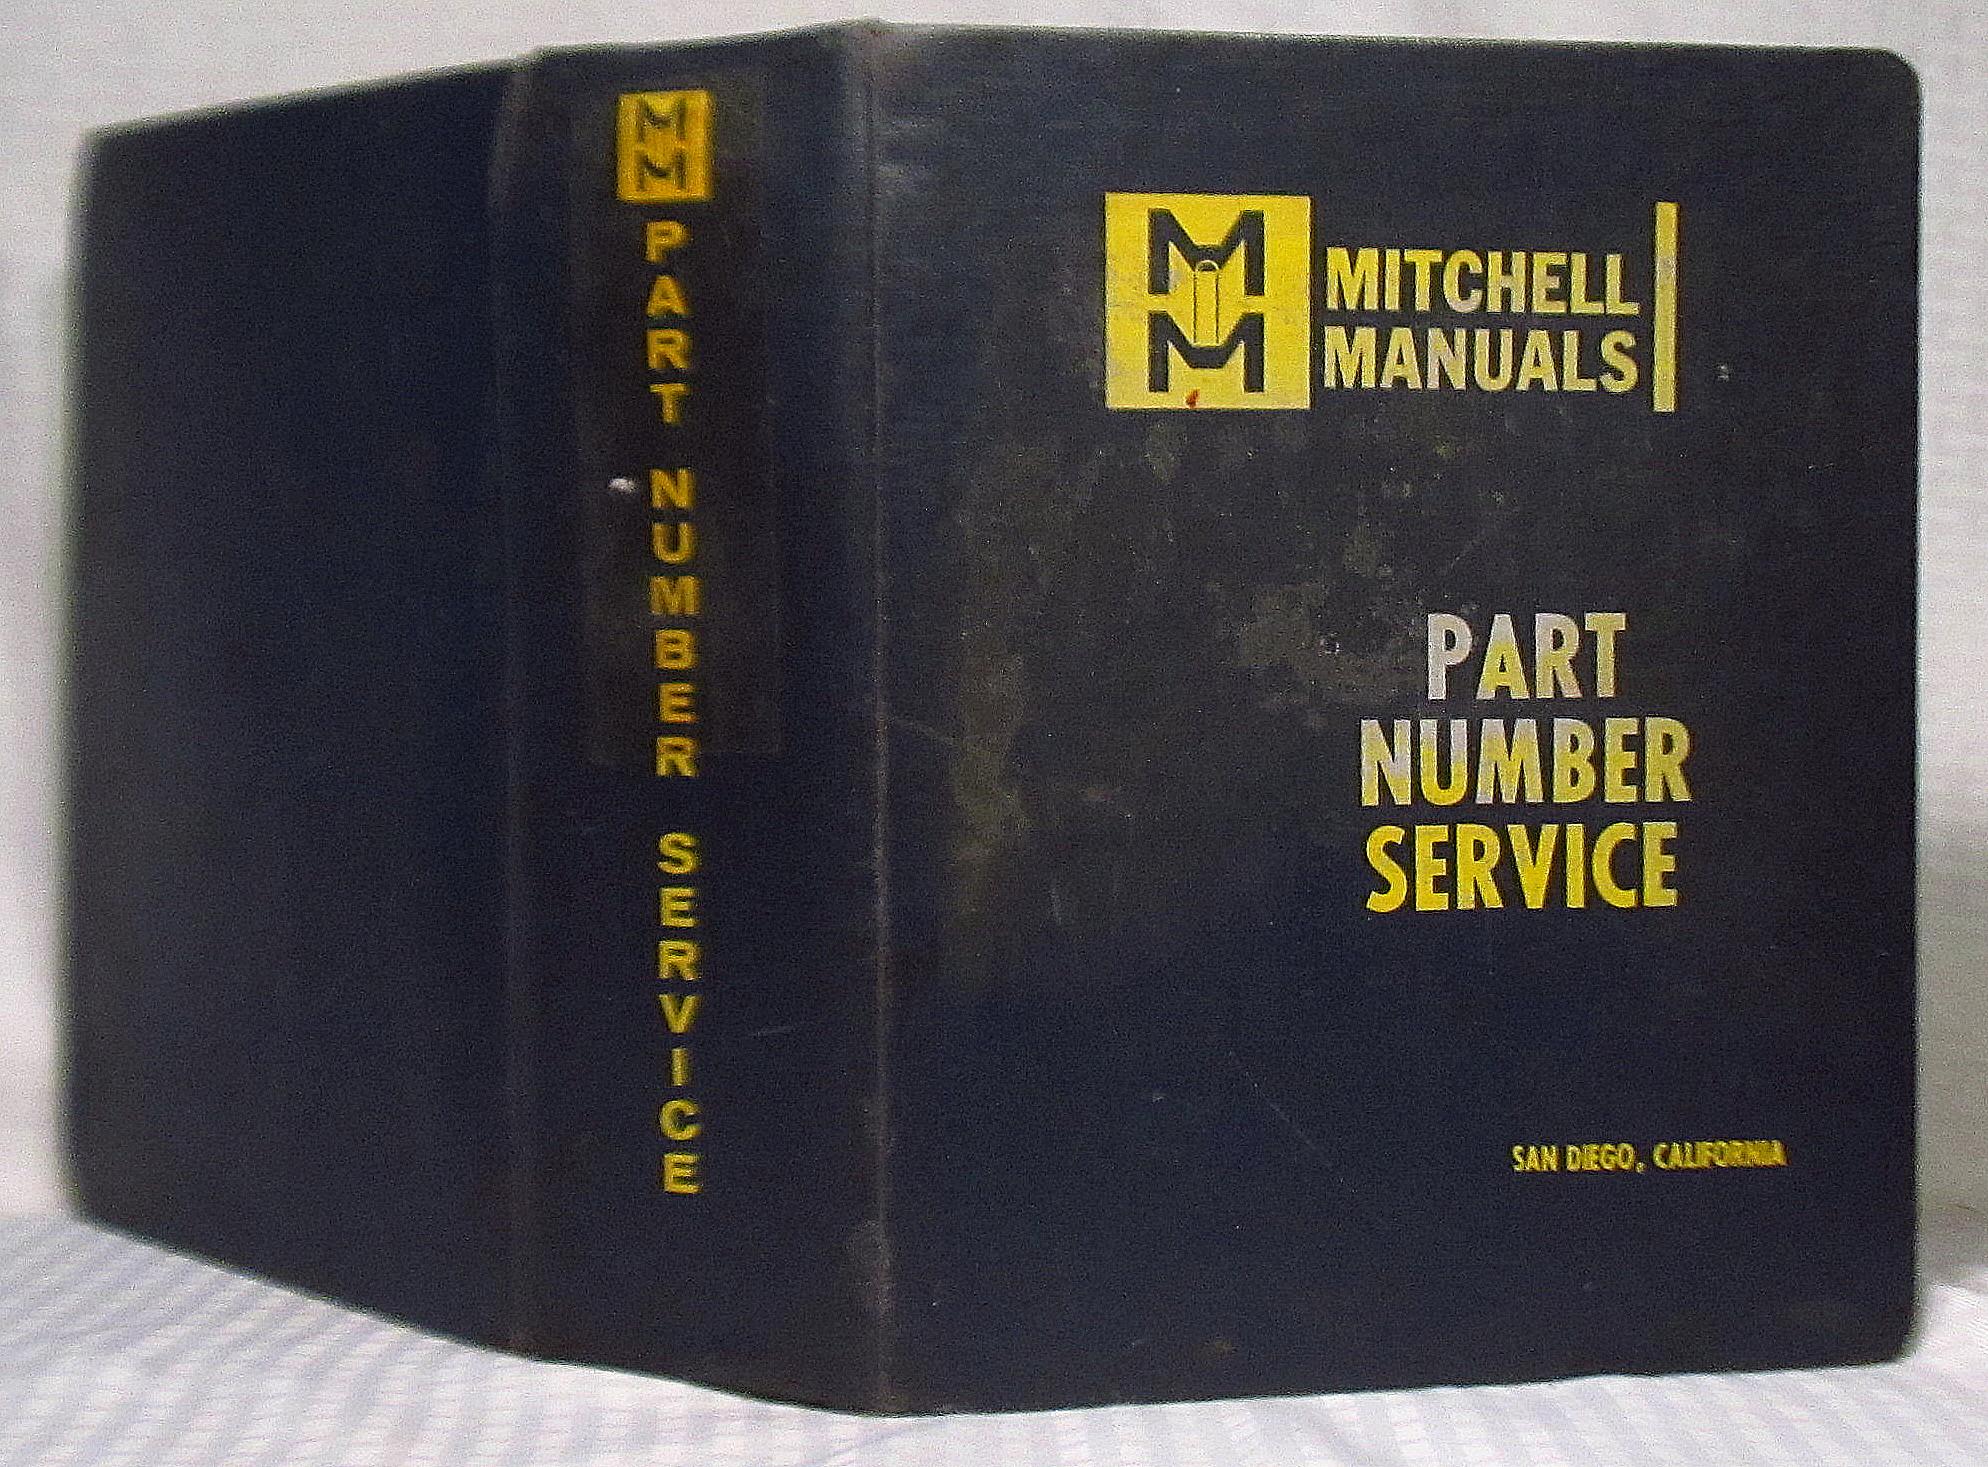 Part Number Service (Cadillac - GM Parts Division 1966 ...